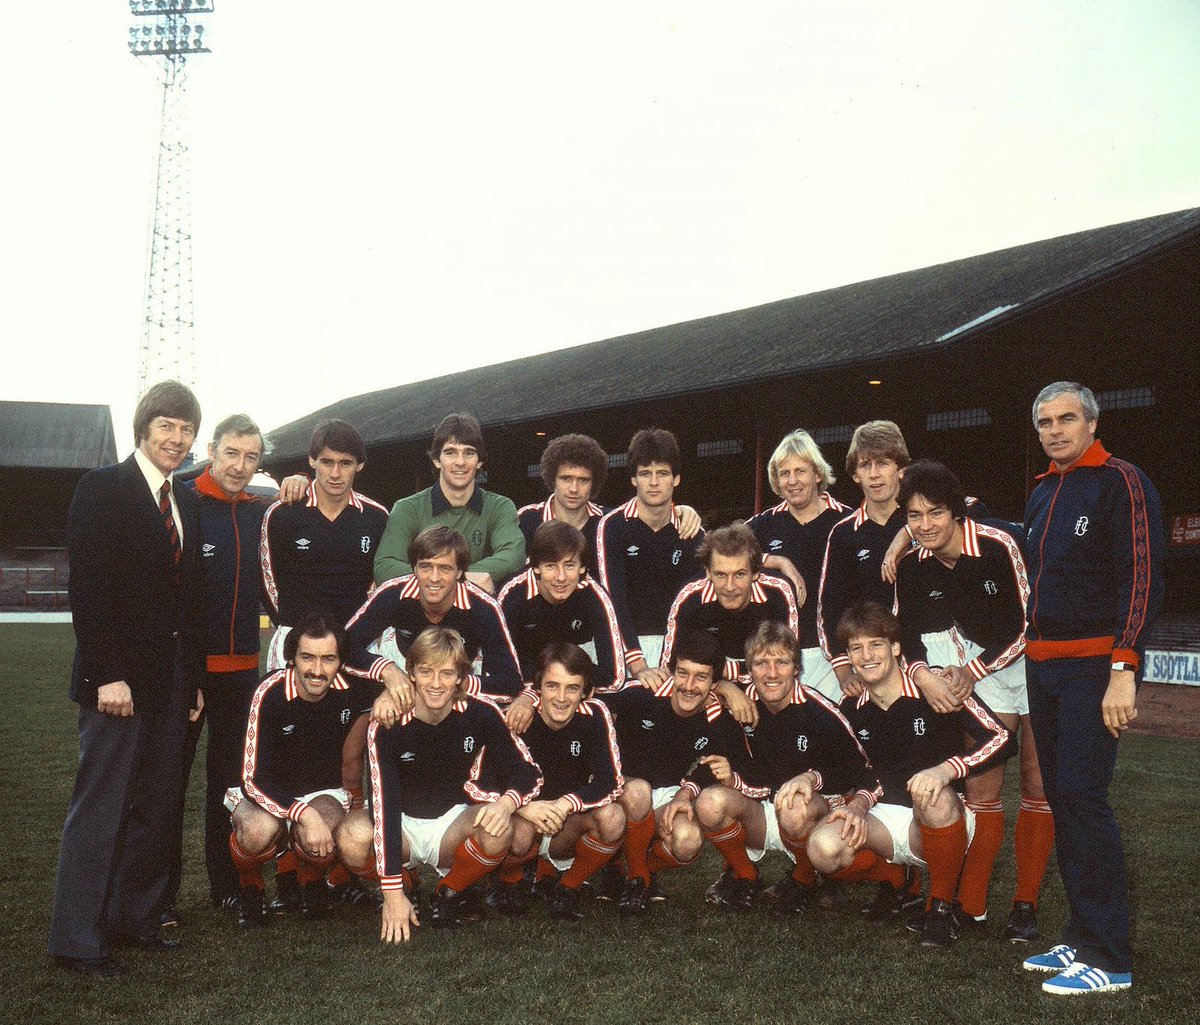 PictureThis Scotland on Twitter: "Dundee FC. (1980/81)… "